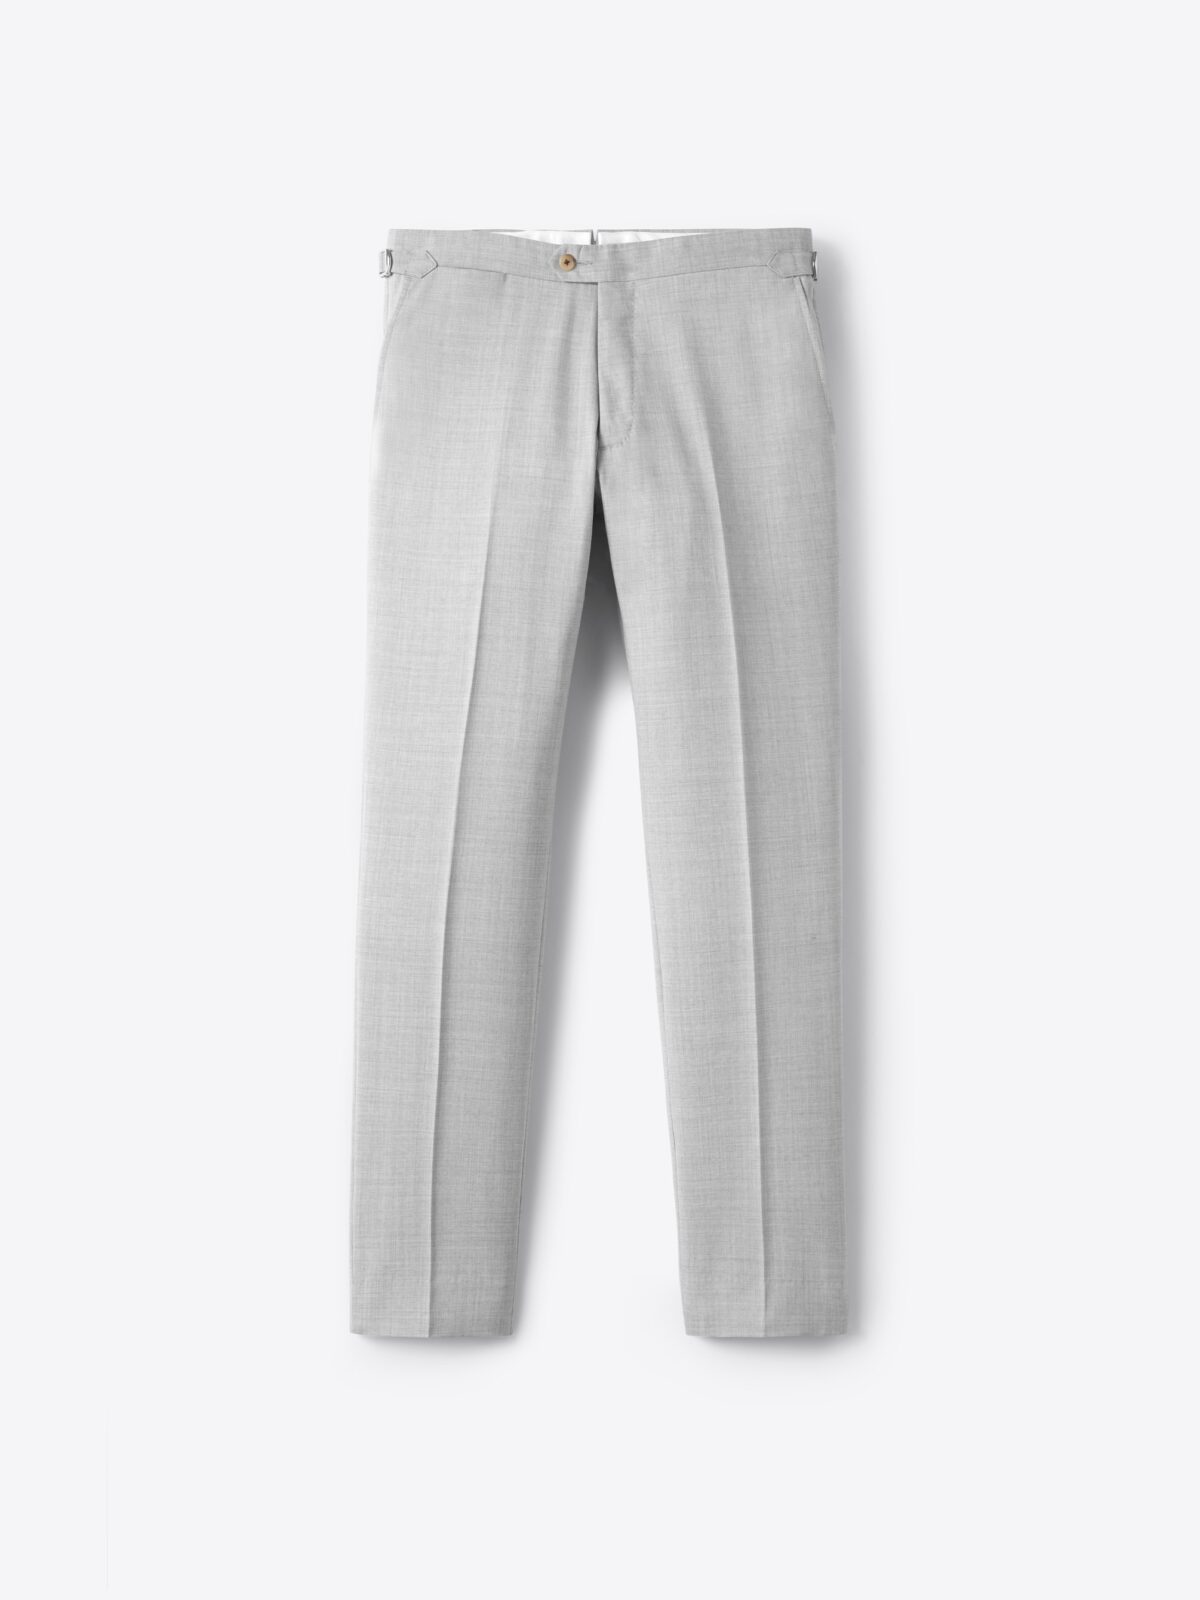 Drago Light Grey S130s Tropical Wool Dress Pant - Custom Fit Tailored  Clothing